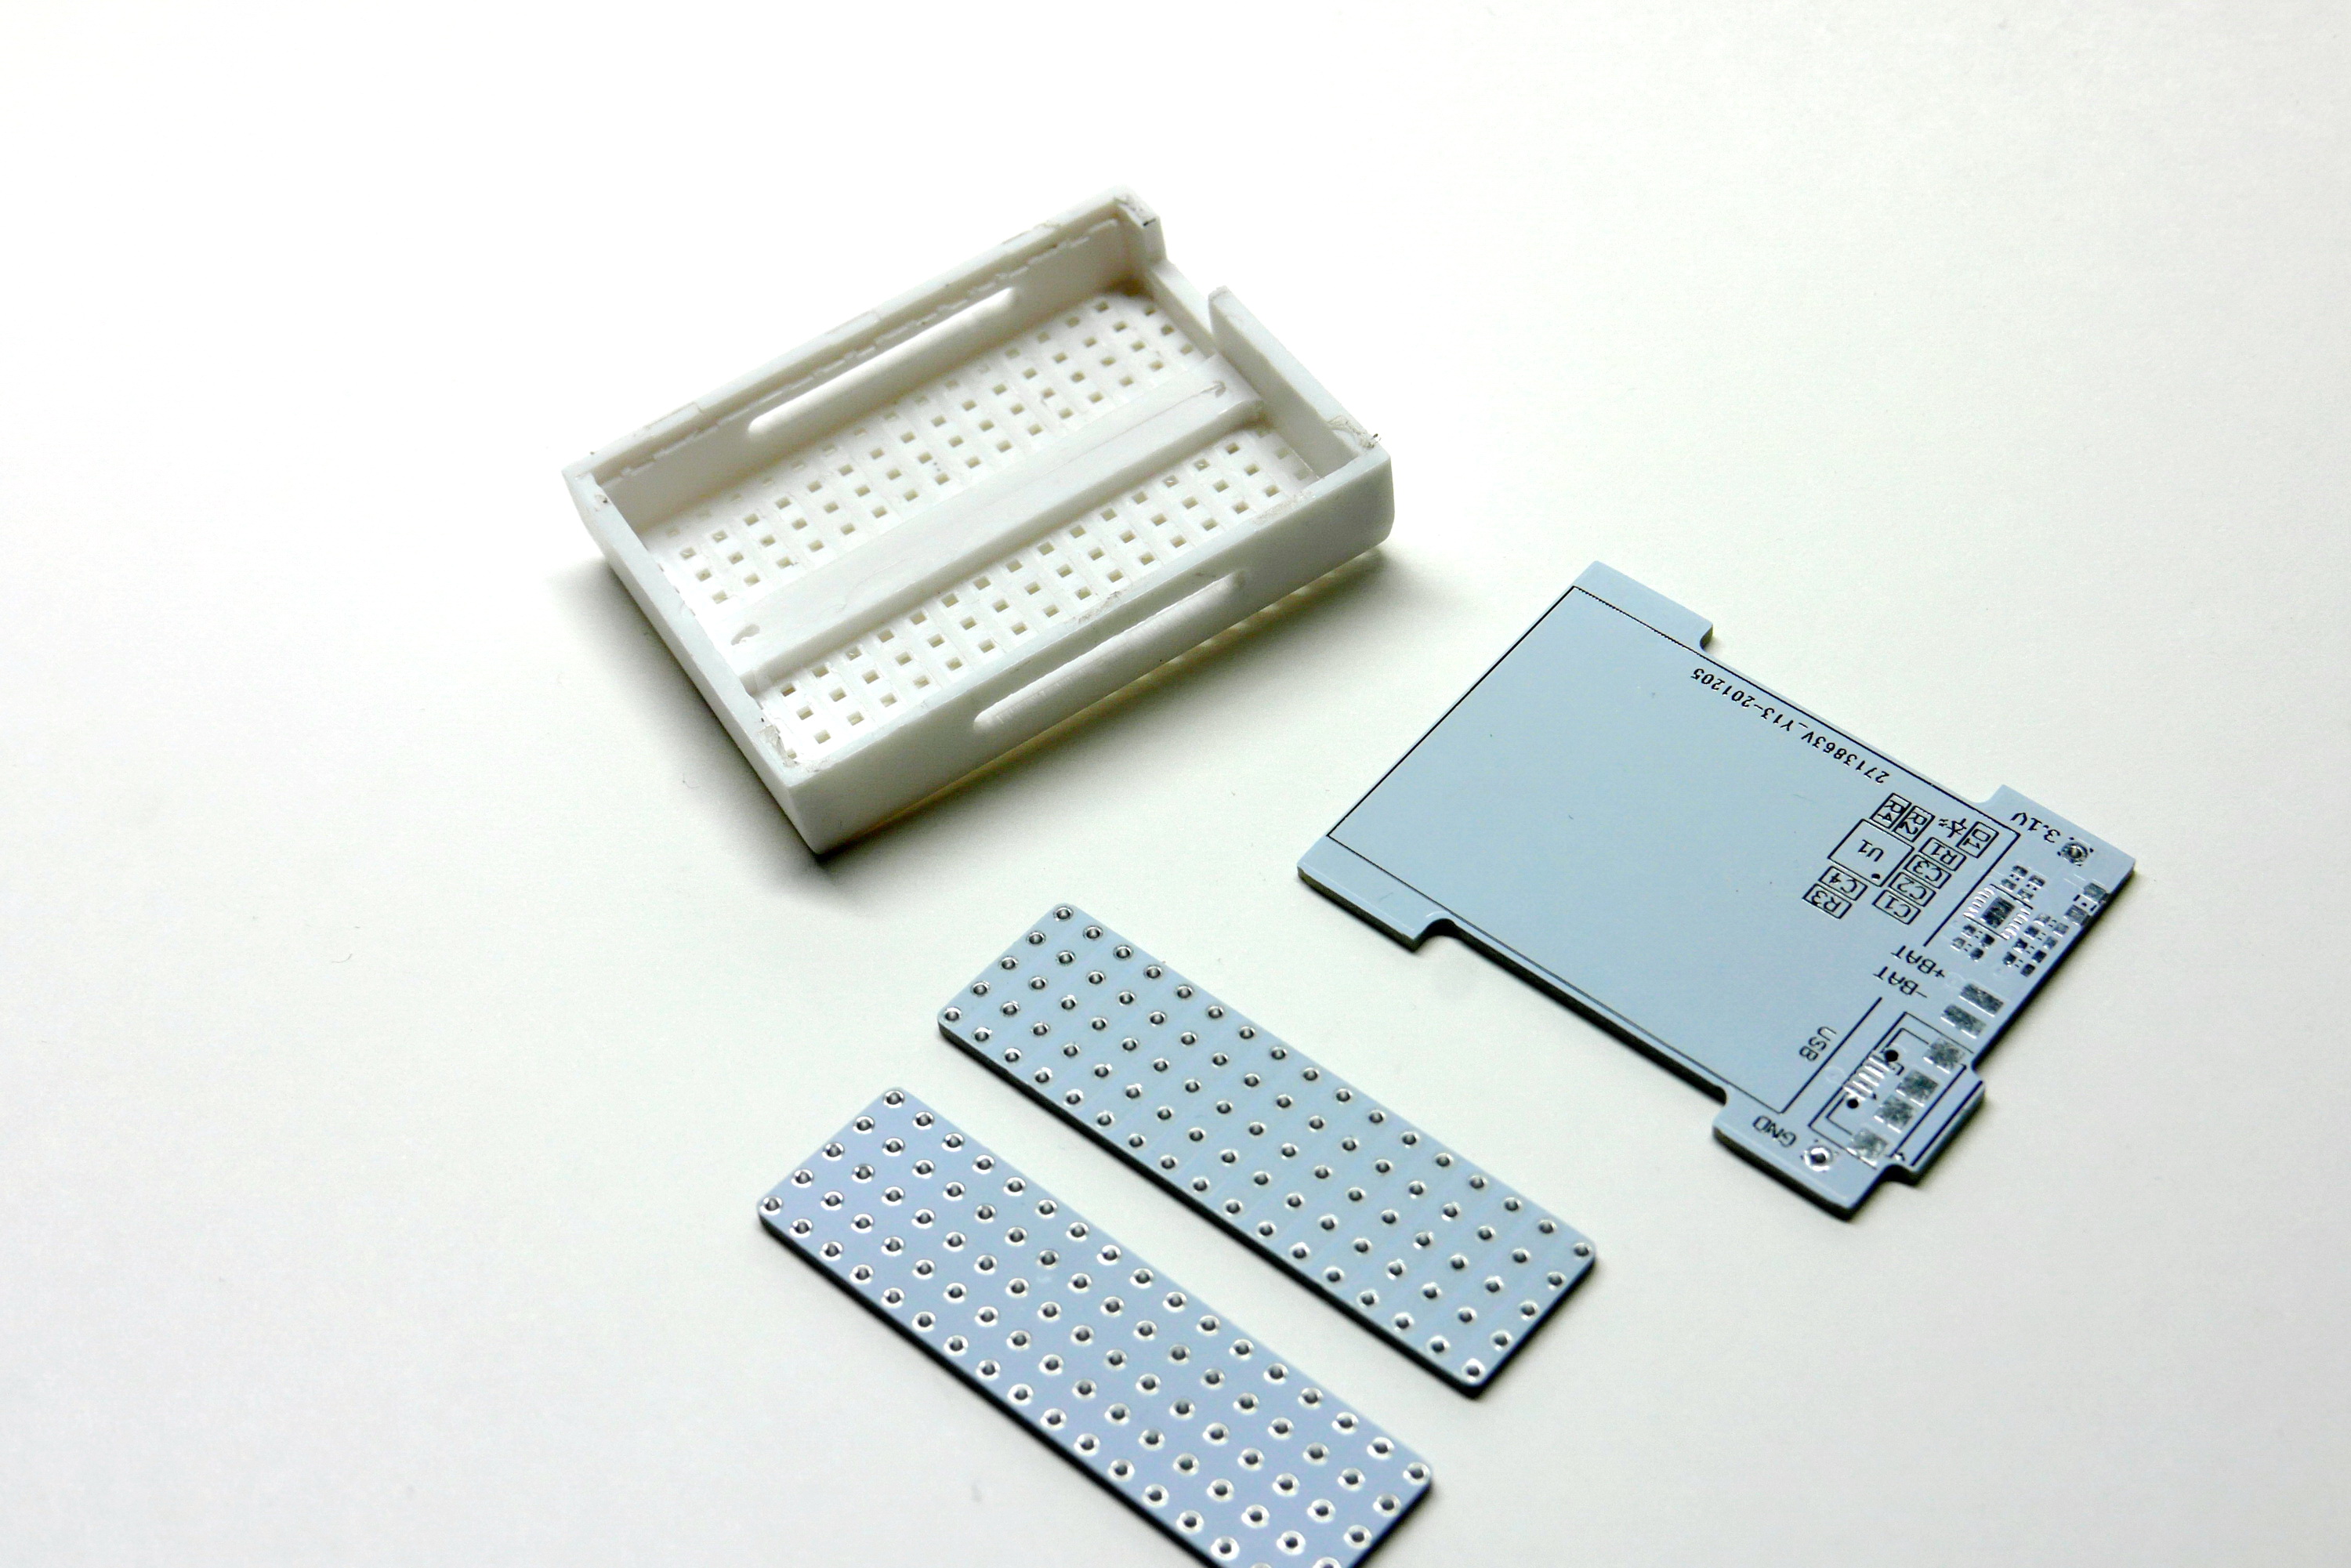 Milled-out breadboard and custom PCBs